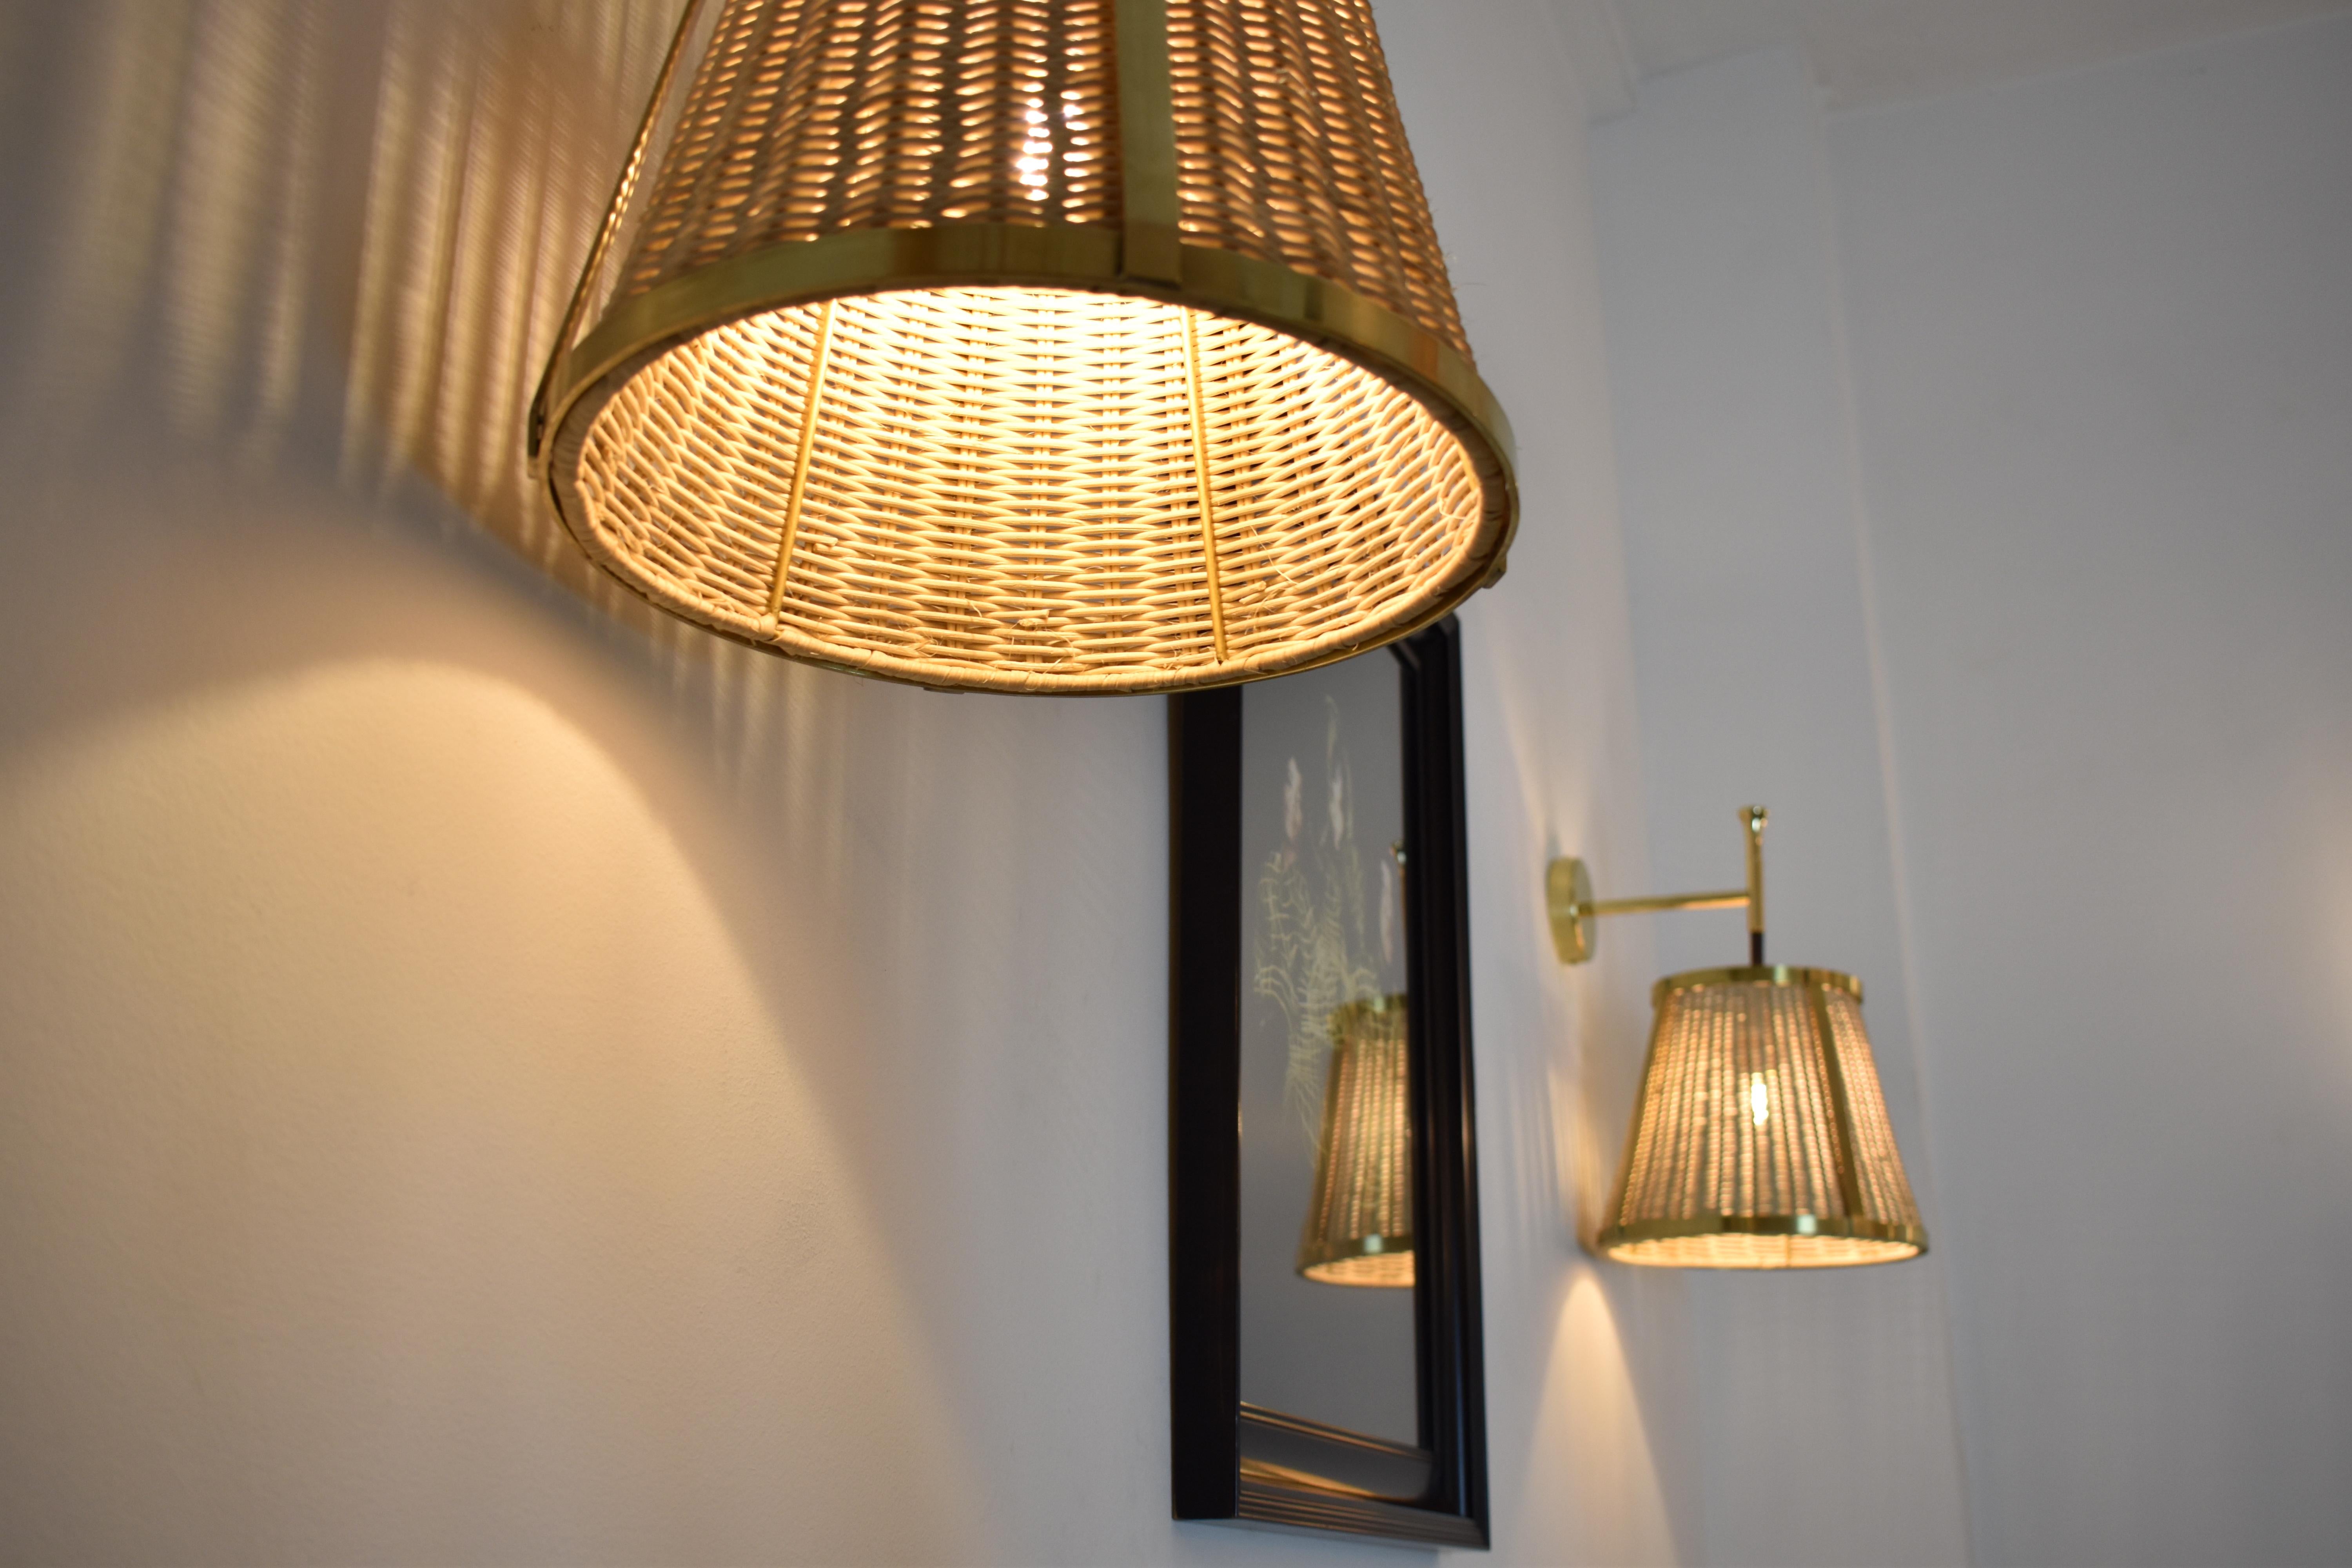 Caeli-W4 Brass and Rattan Sconce, Jas For Sale 5